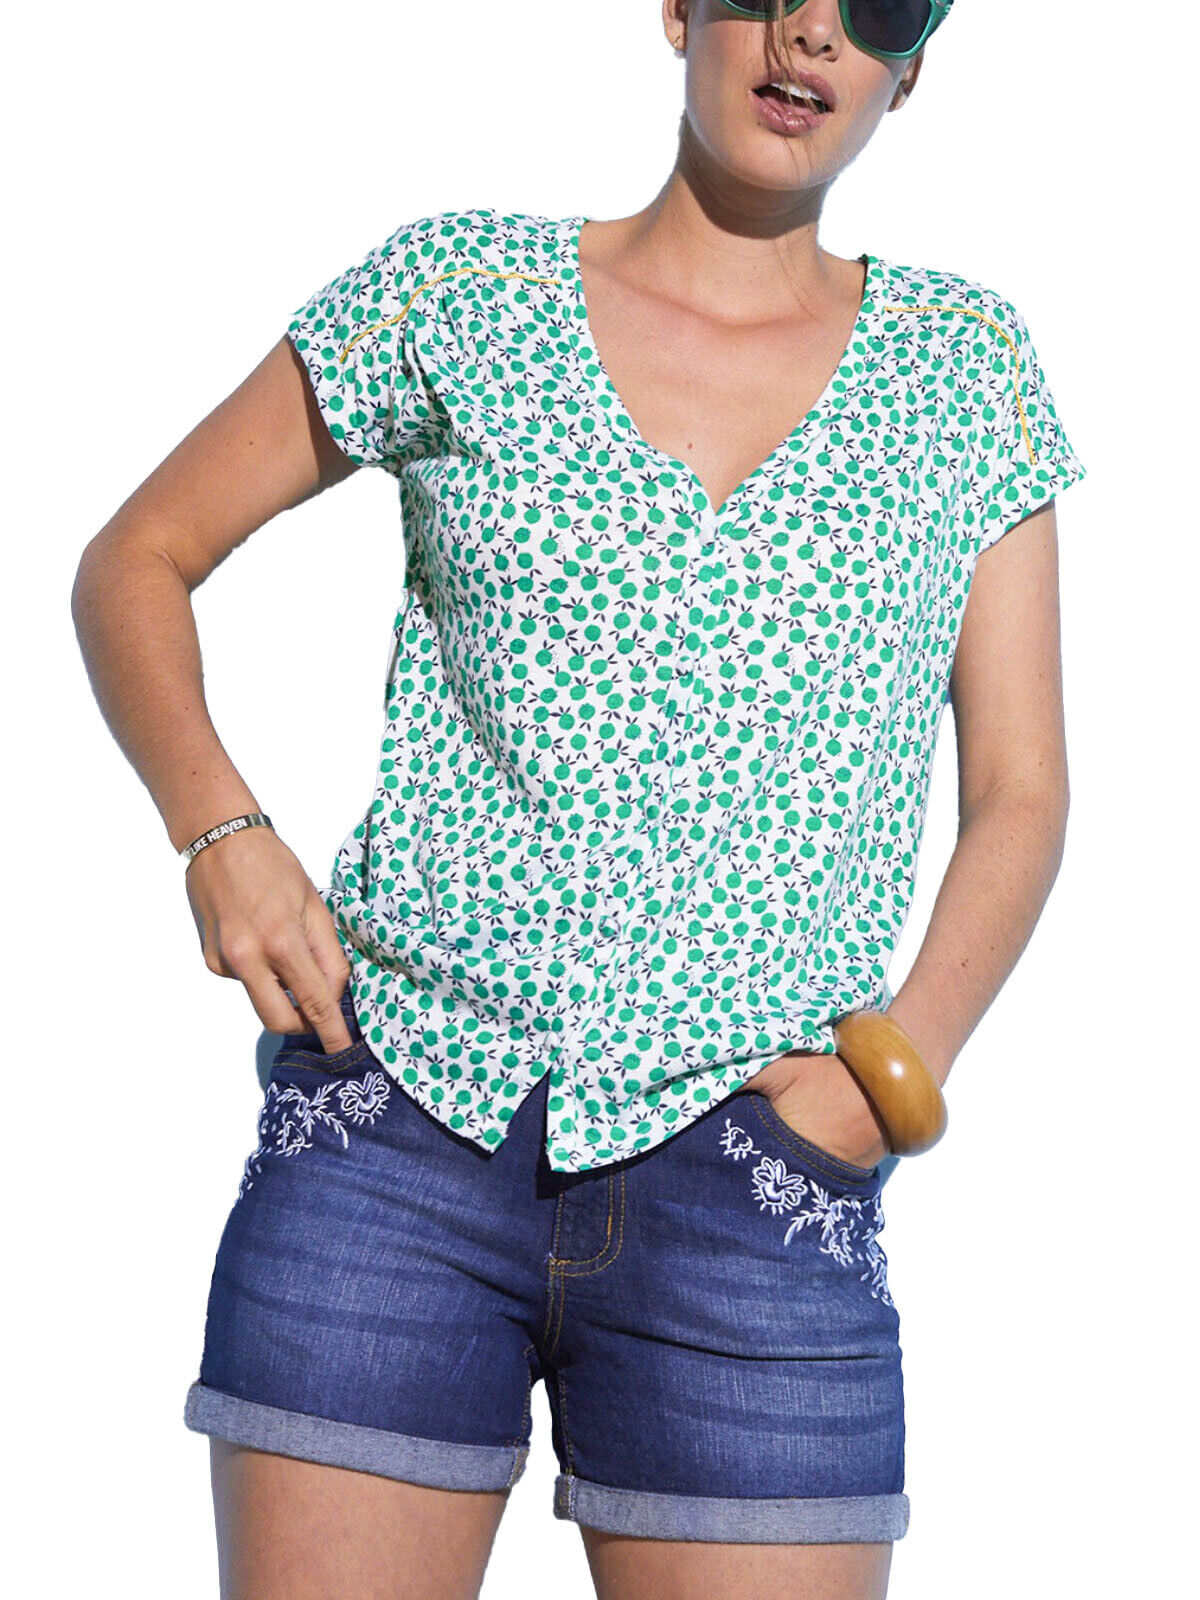 Blancheporte Green Apple Print Button Front Top in Sizes 18/20, 22, 26